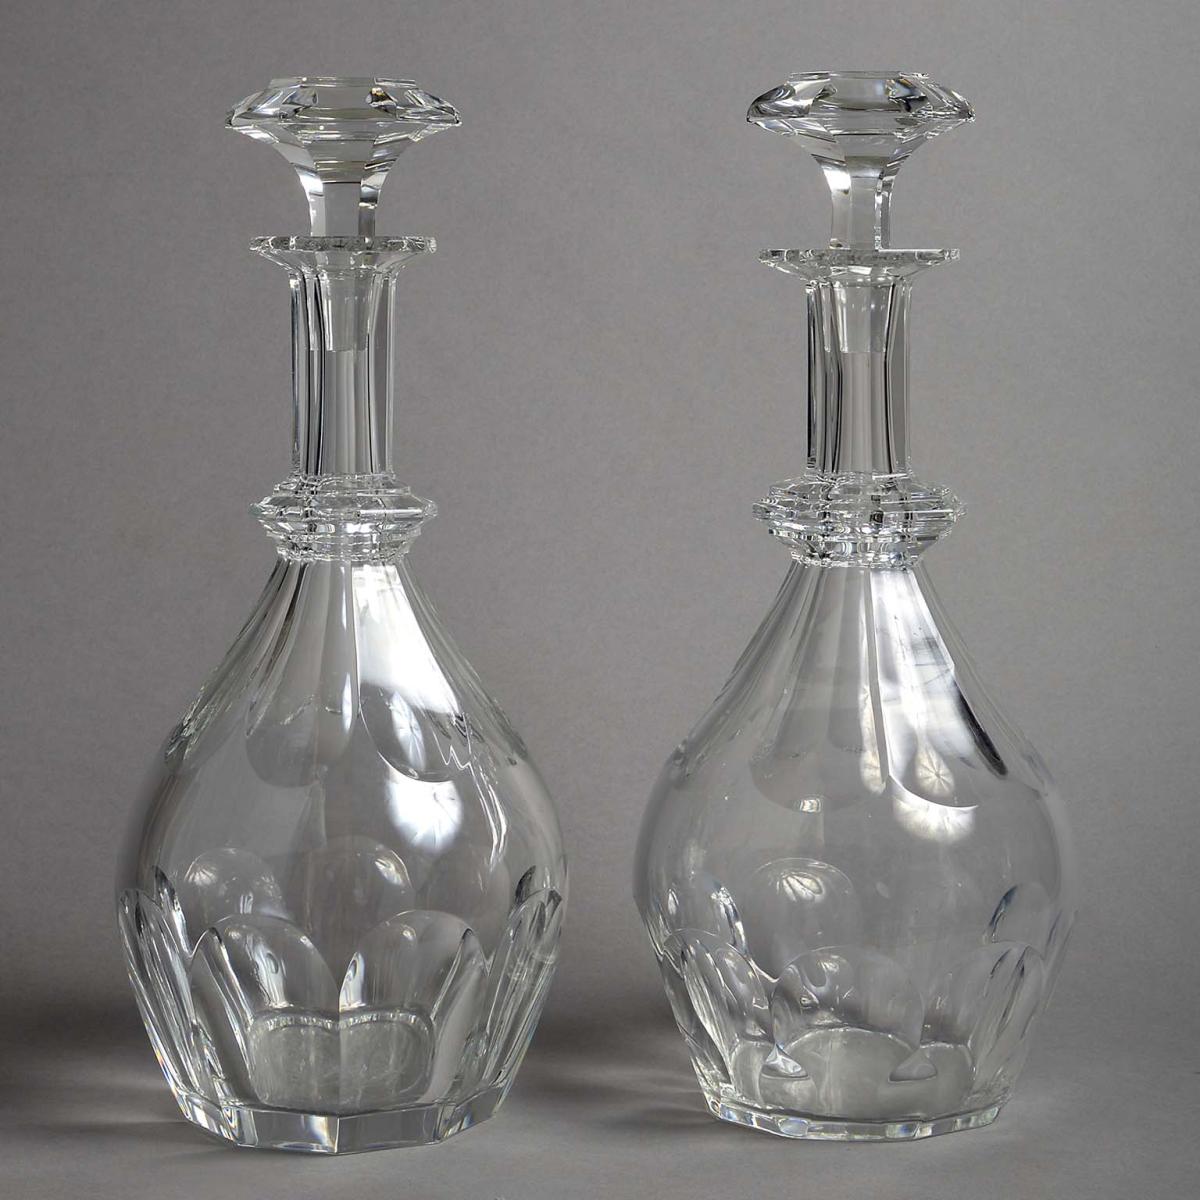 Baccarat Double Magnum Decanters